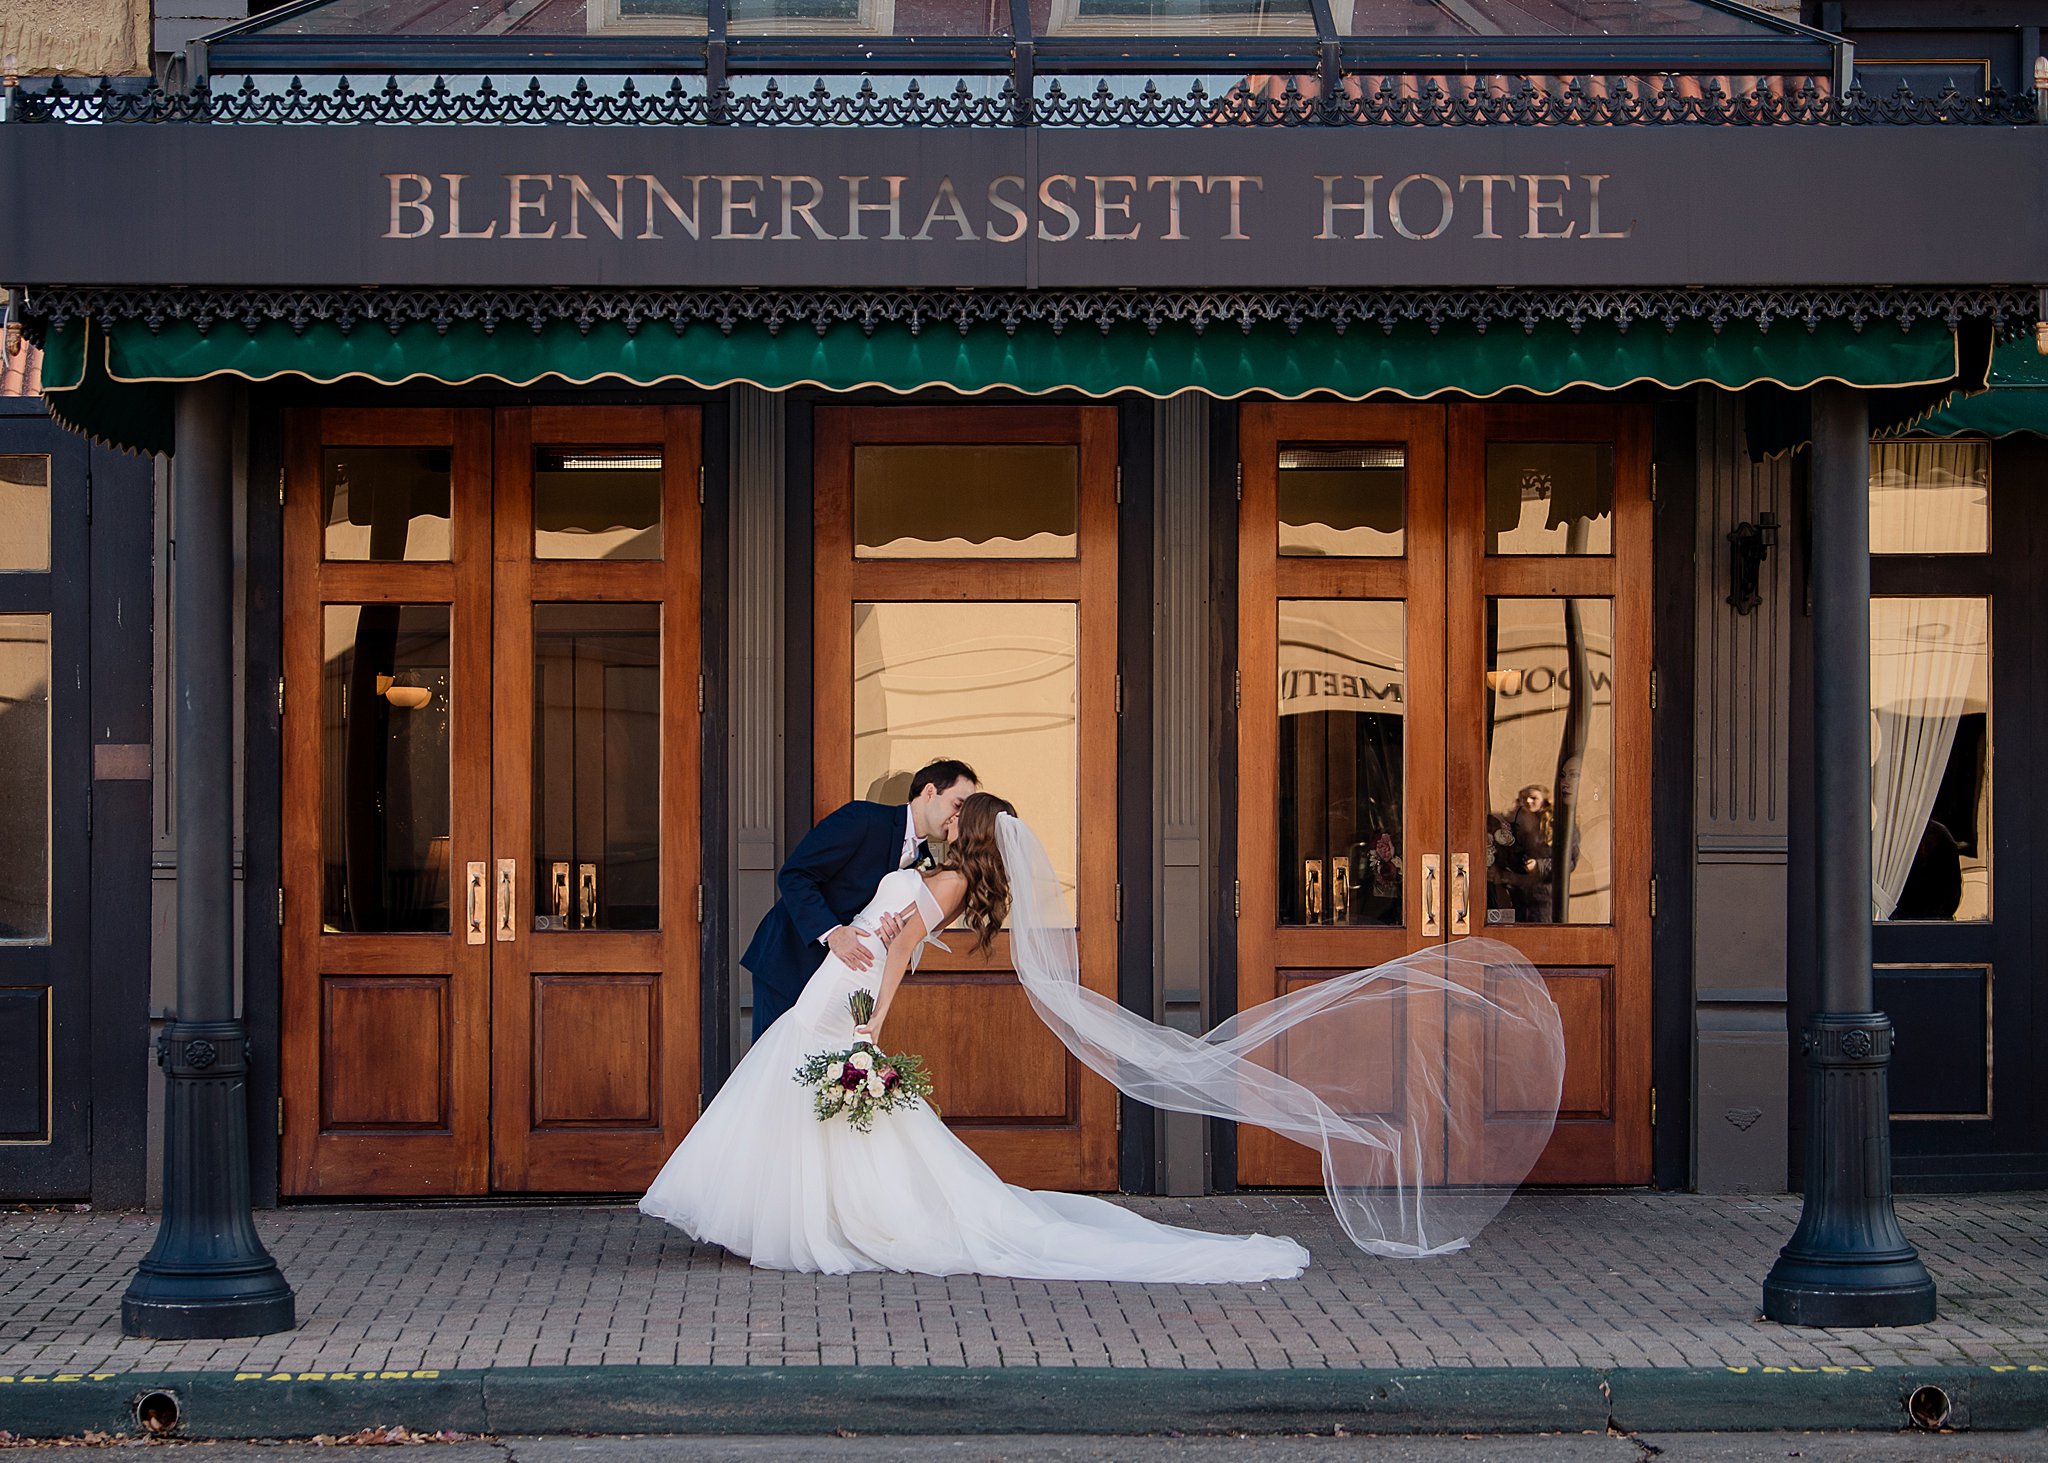 Newlyweds kiss under the front facade of the Blennerhassett Hotel wedding venue